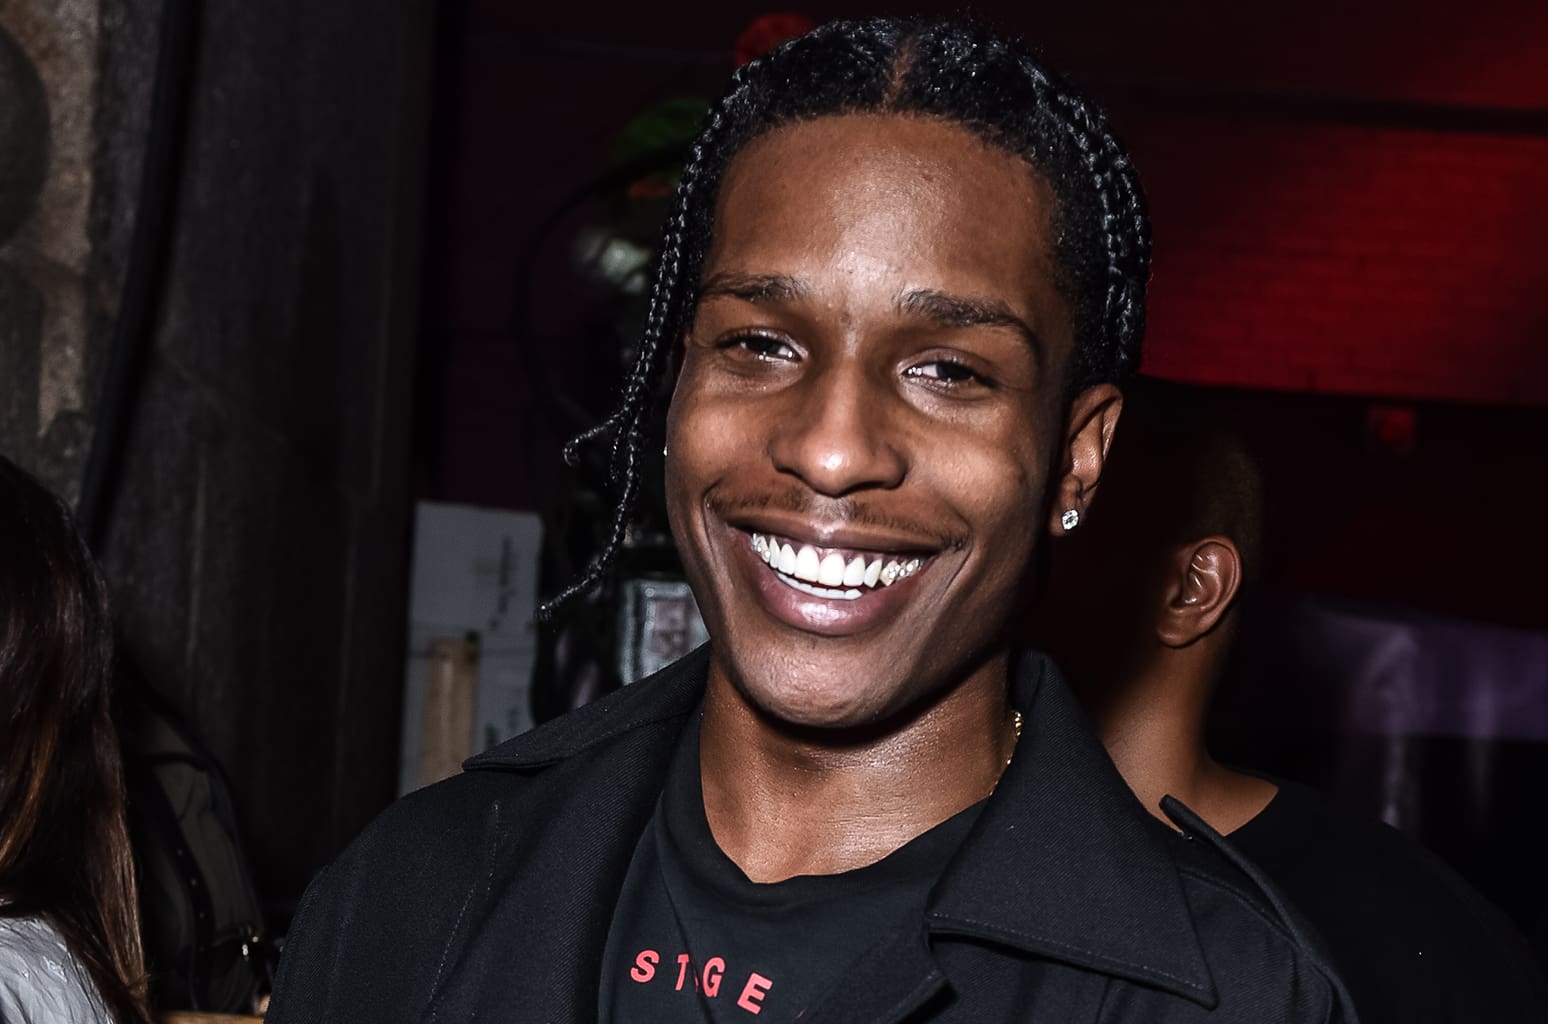 ASAP Rocky Was Reportedly Arrested In Sweden - He's Suspected Of Assault